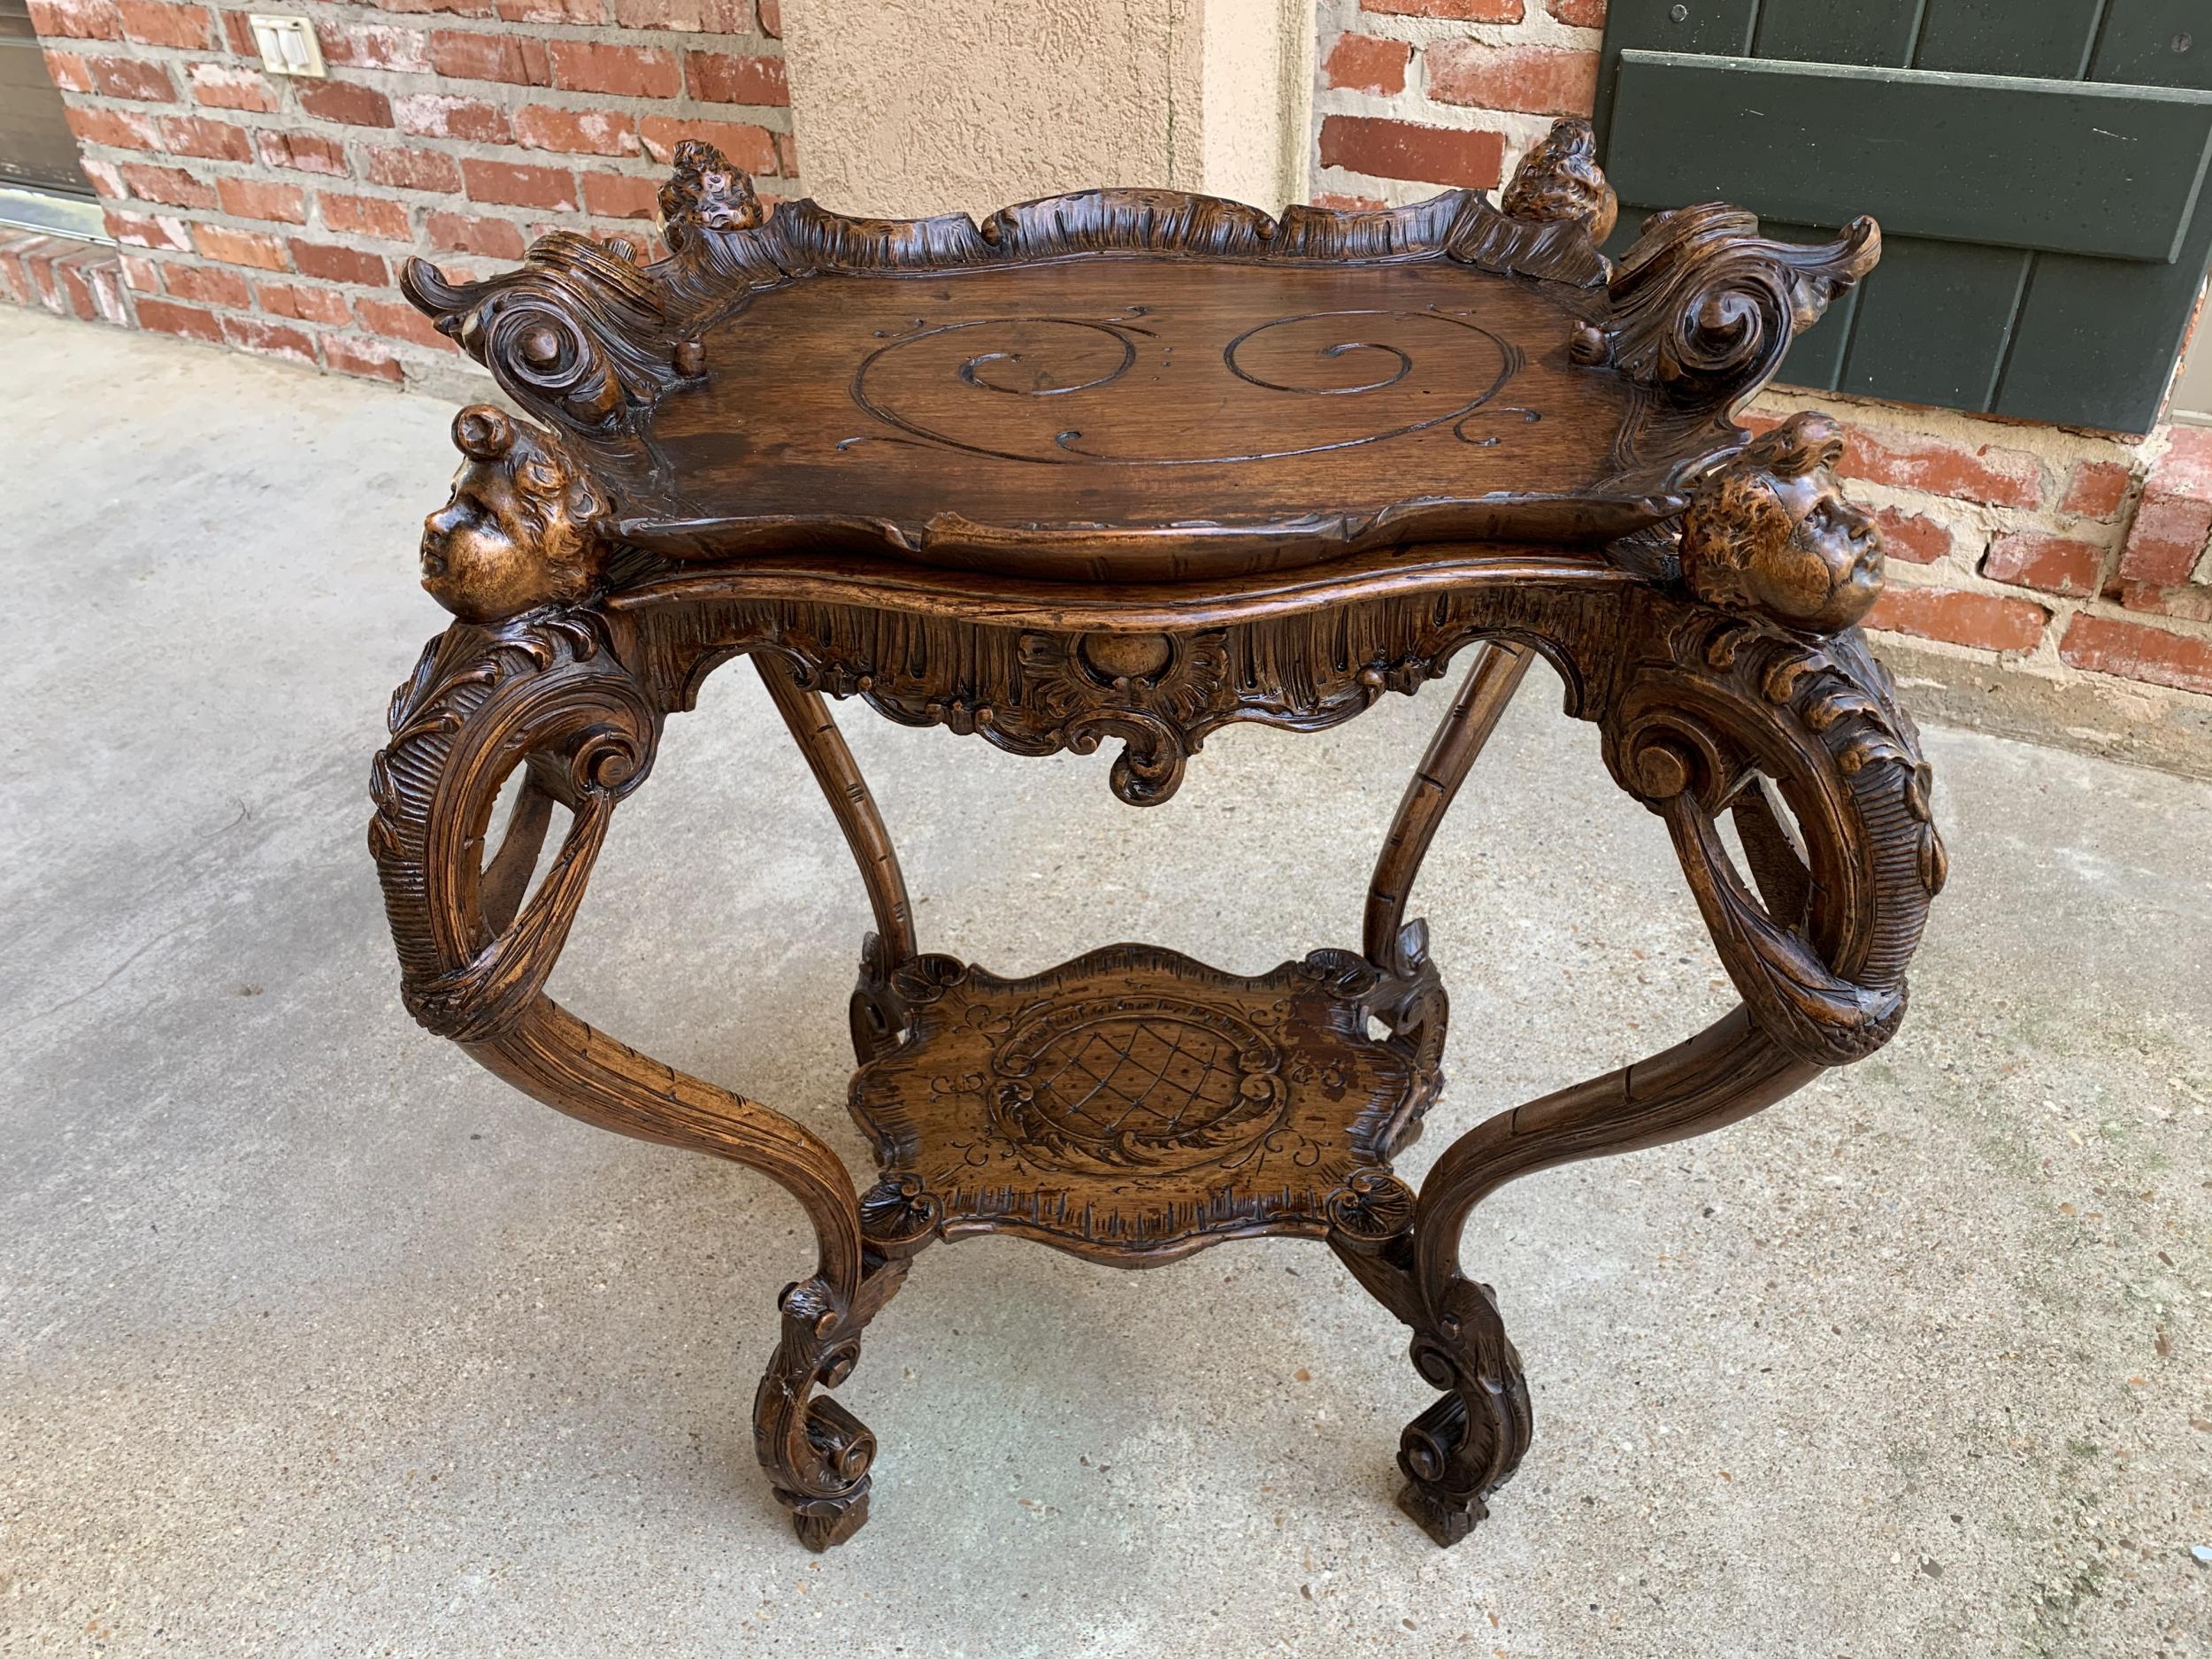 19th century French Carved Oak Sofa Dessert Table Serving Tray Louis XV Cherub For Sale 12